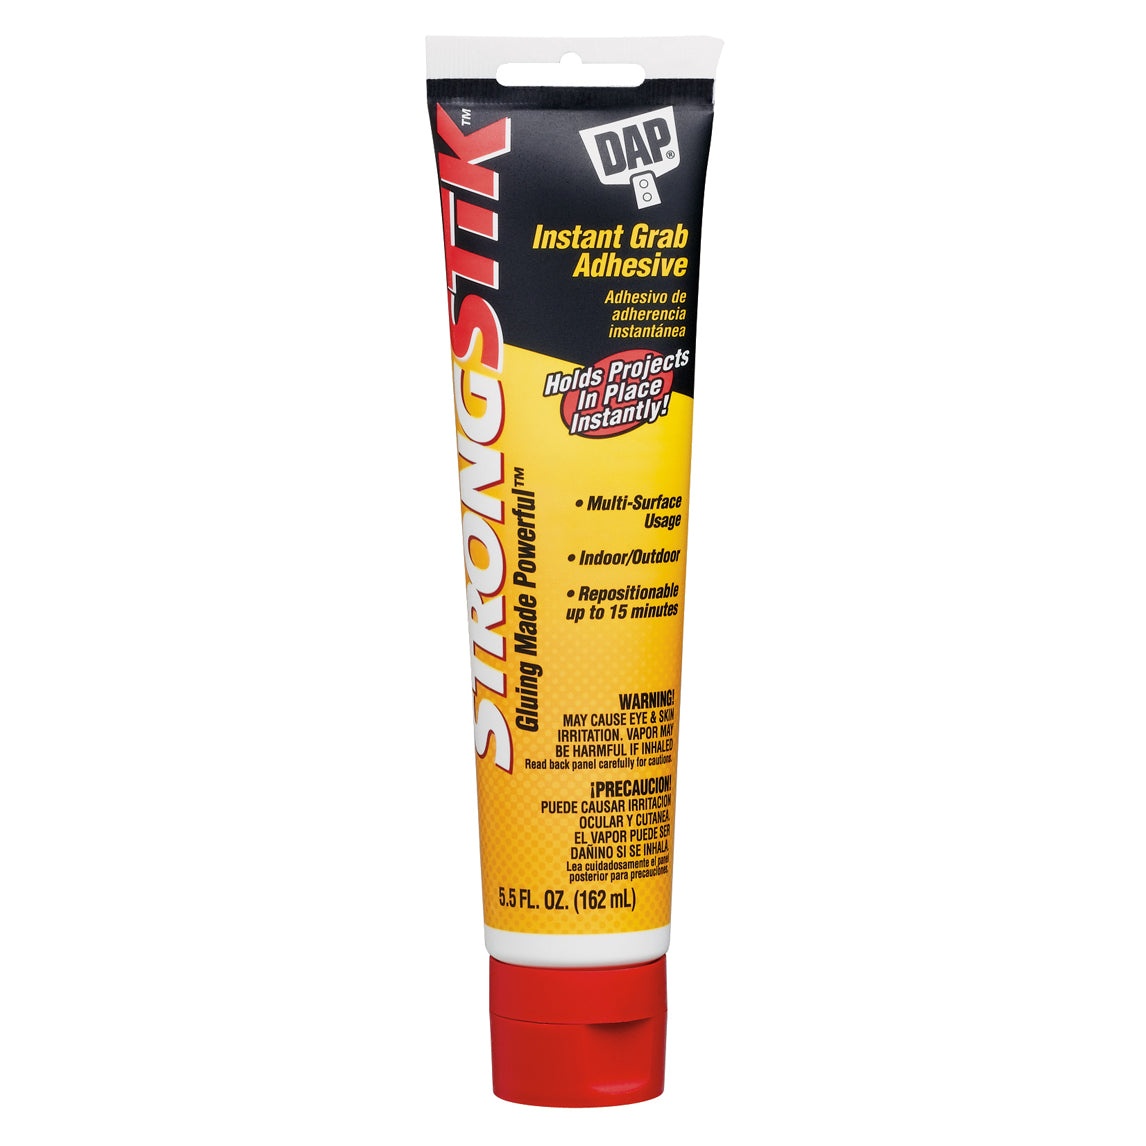 STRONGSTIK Instant Grab Adhesive